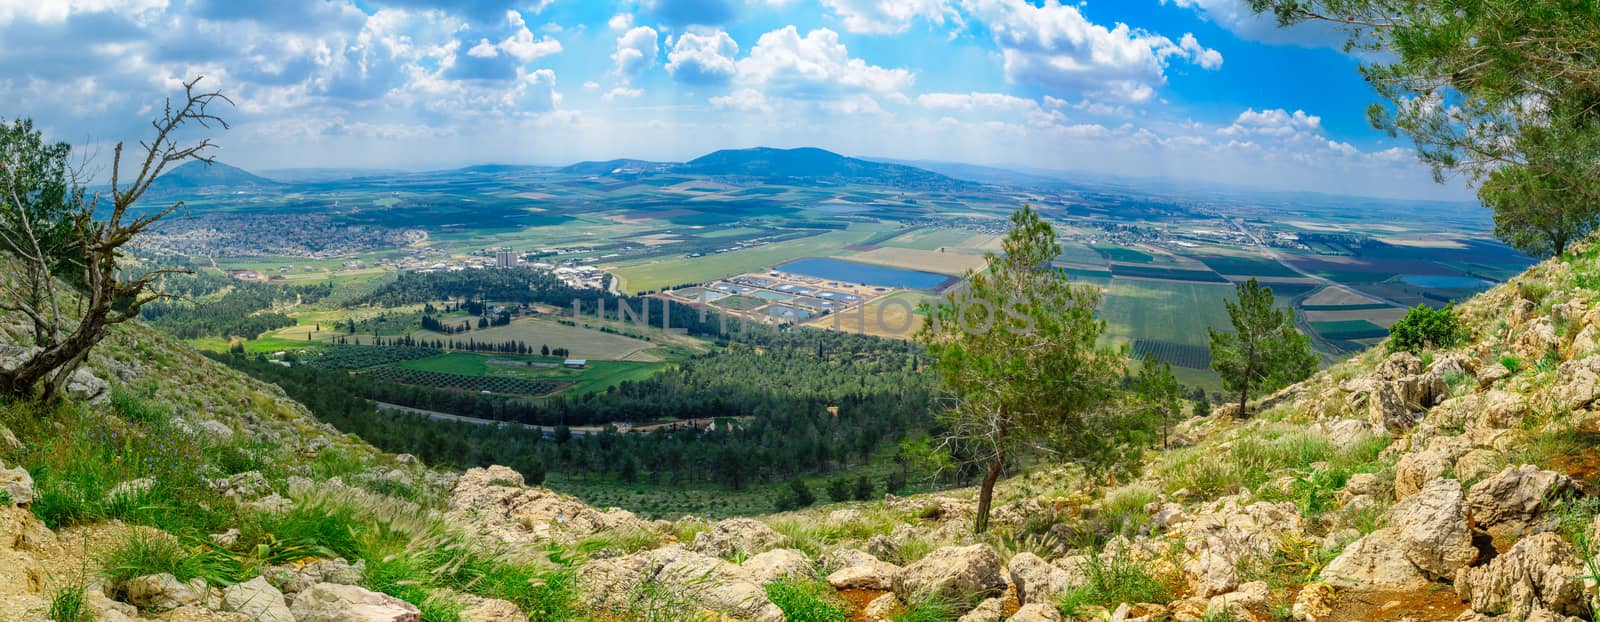 Jezreel Valley landscape, viewed from Mount Precipice by RnDmS